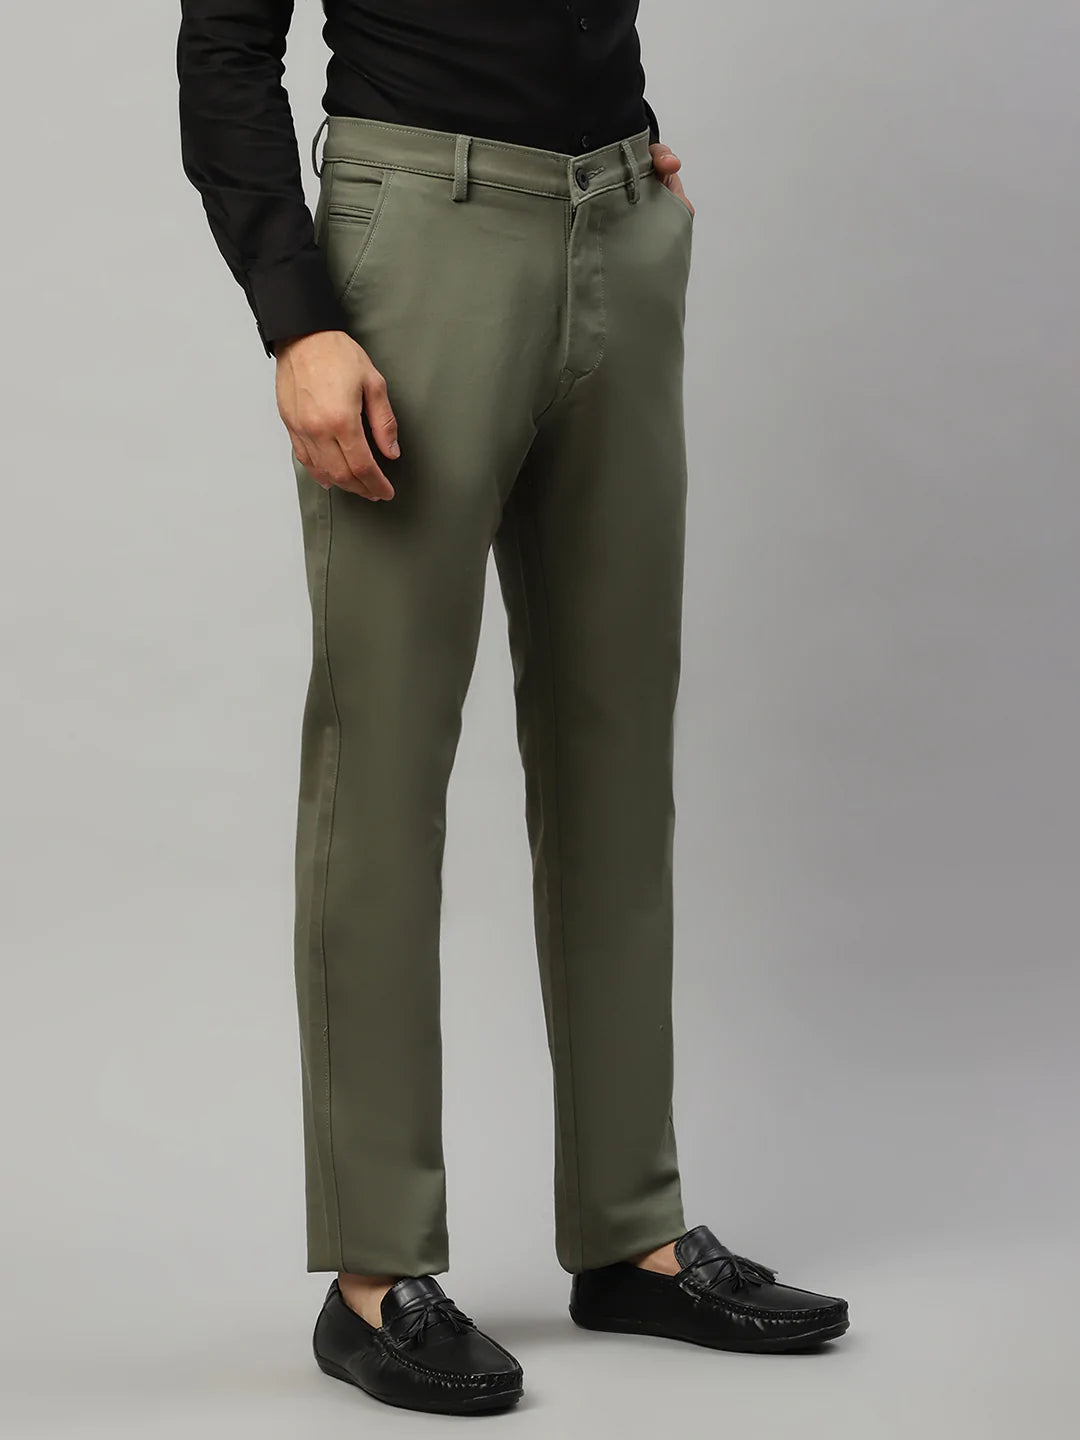 Buy Olive Green Color Cotton Trousers for Women | Regular Fit Cotton –  Naariy